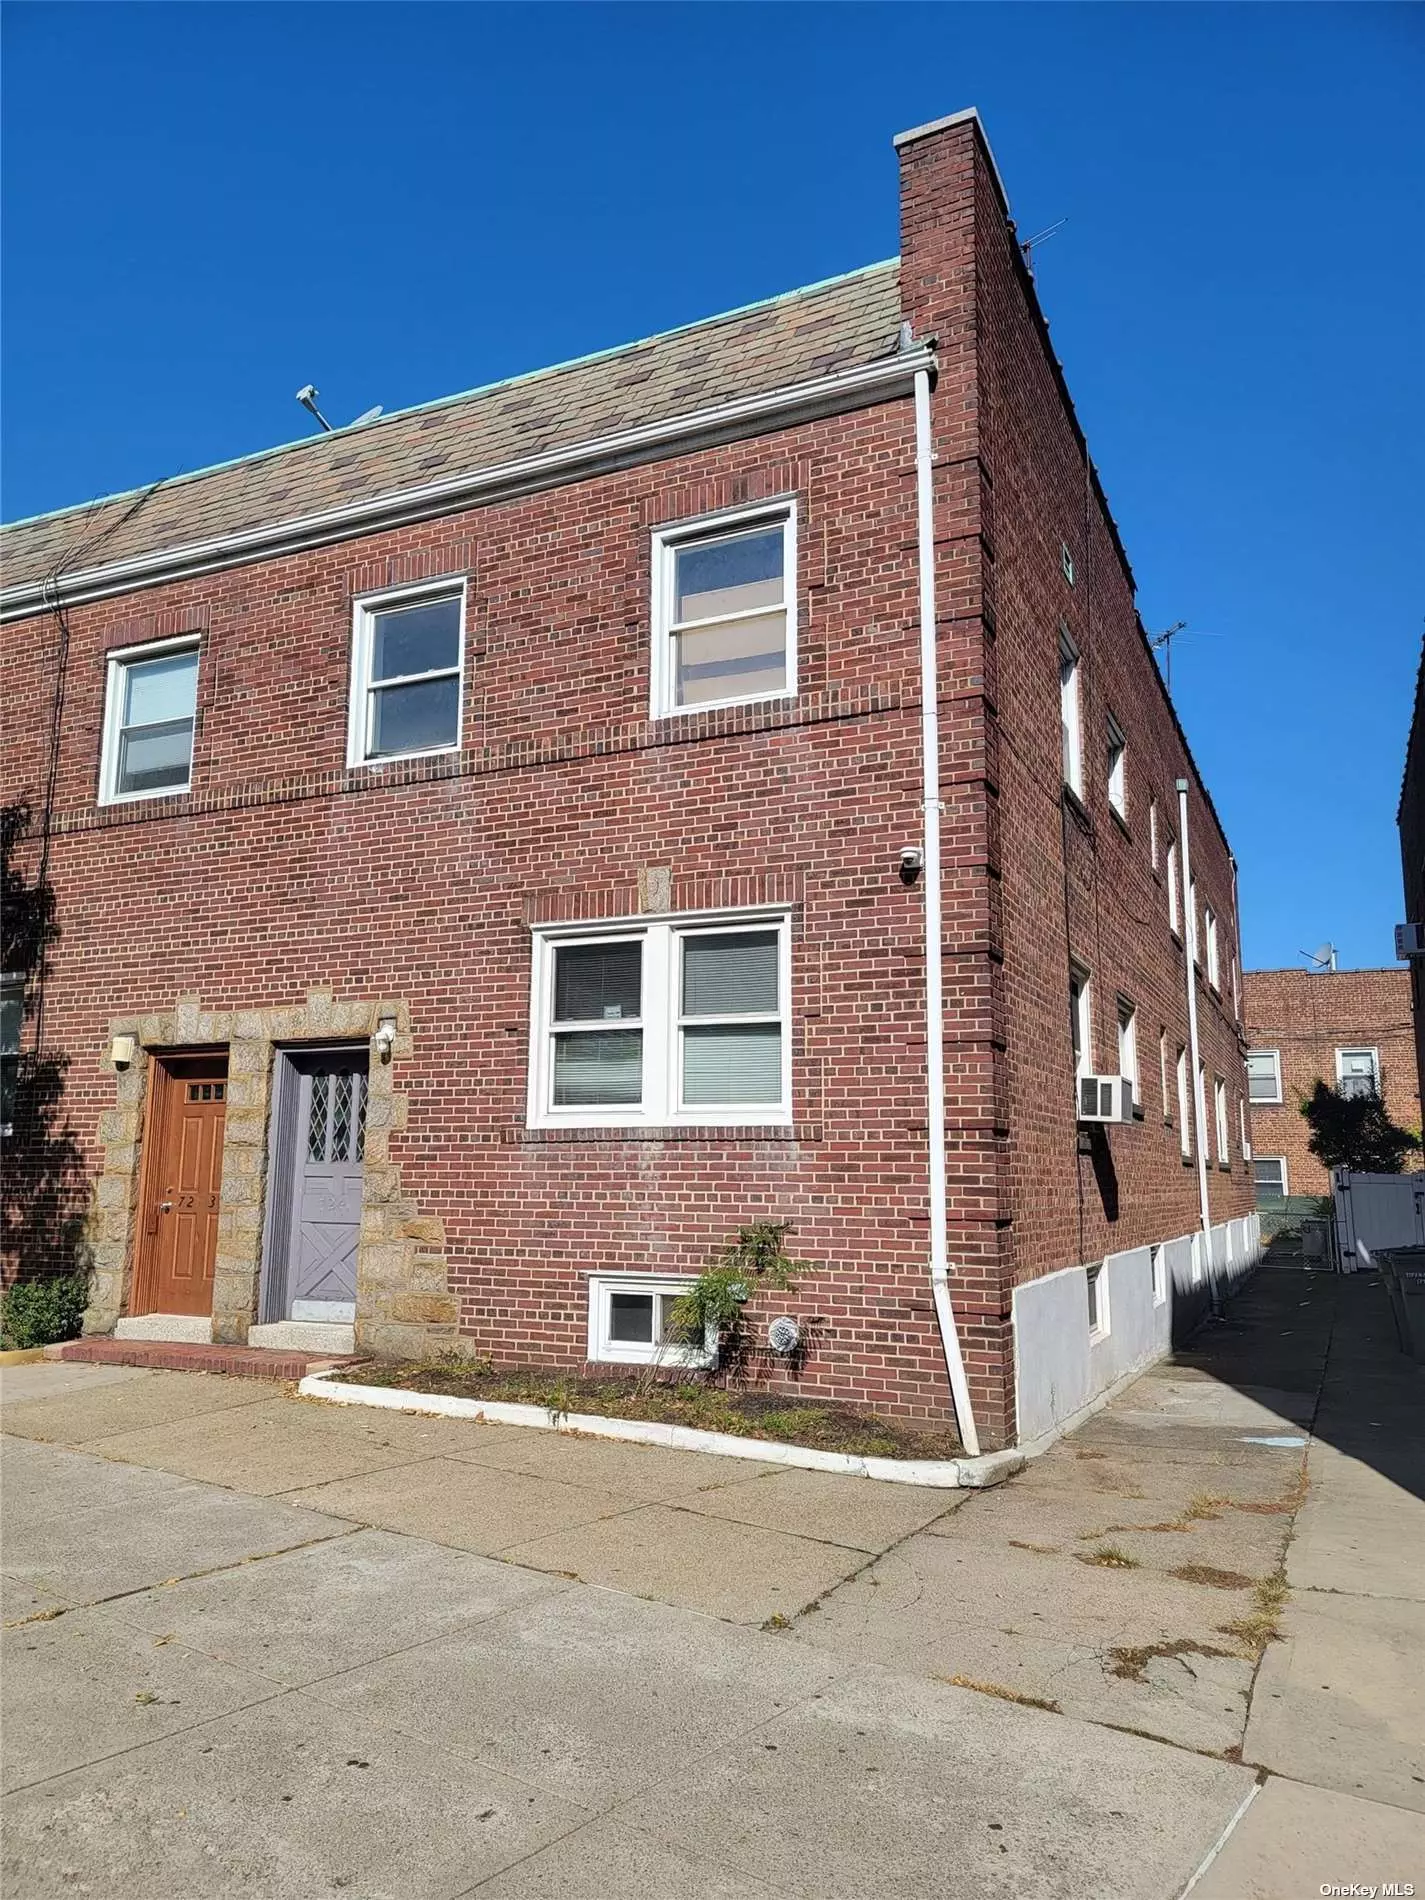 Fully Renovated Bright 2 Bedroom (Queen) w/ 1 Bath. Hardwood Floors, New Kitchen, & Bath. Stainless Steel Appliances, Lots of Closets, Close to All. Small Pets OK. Good Credit is a MUST. 1 Month Broker Fee.